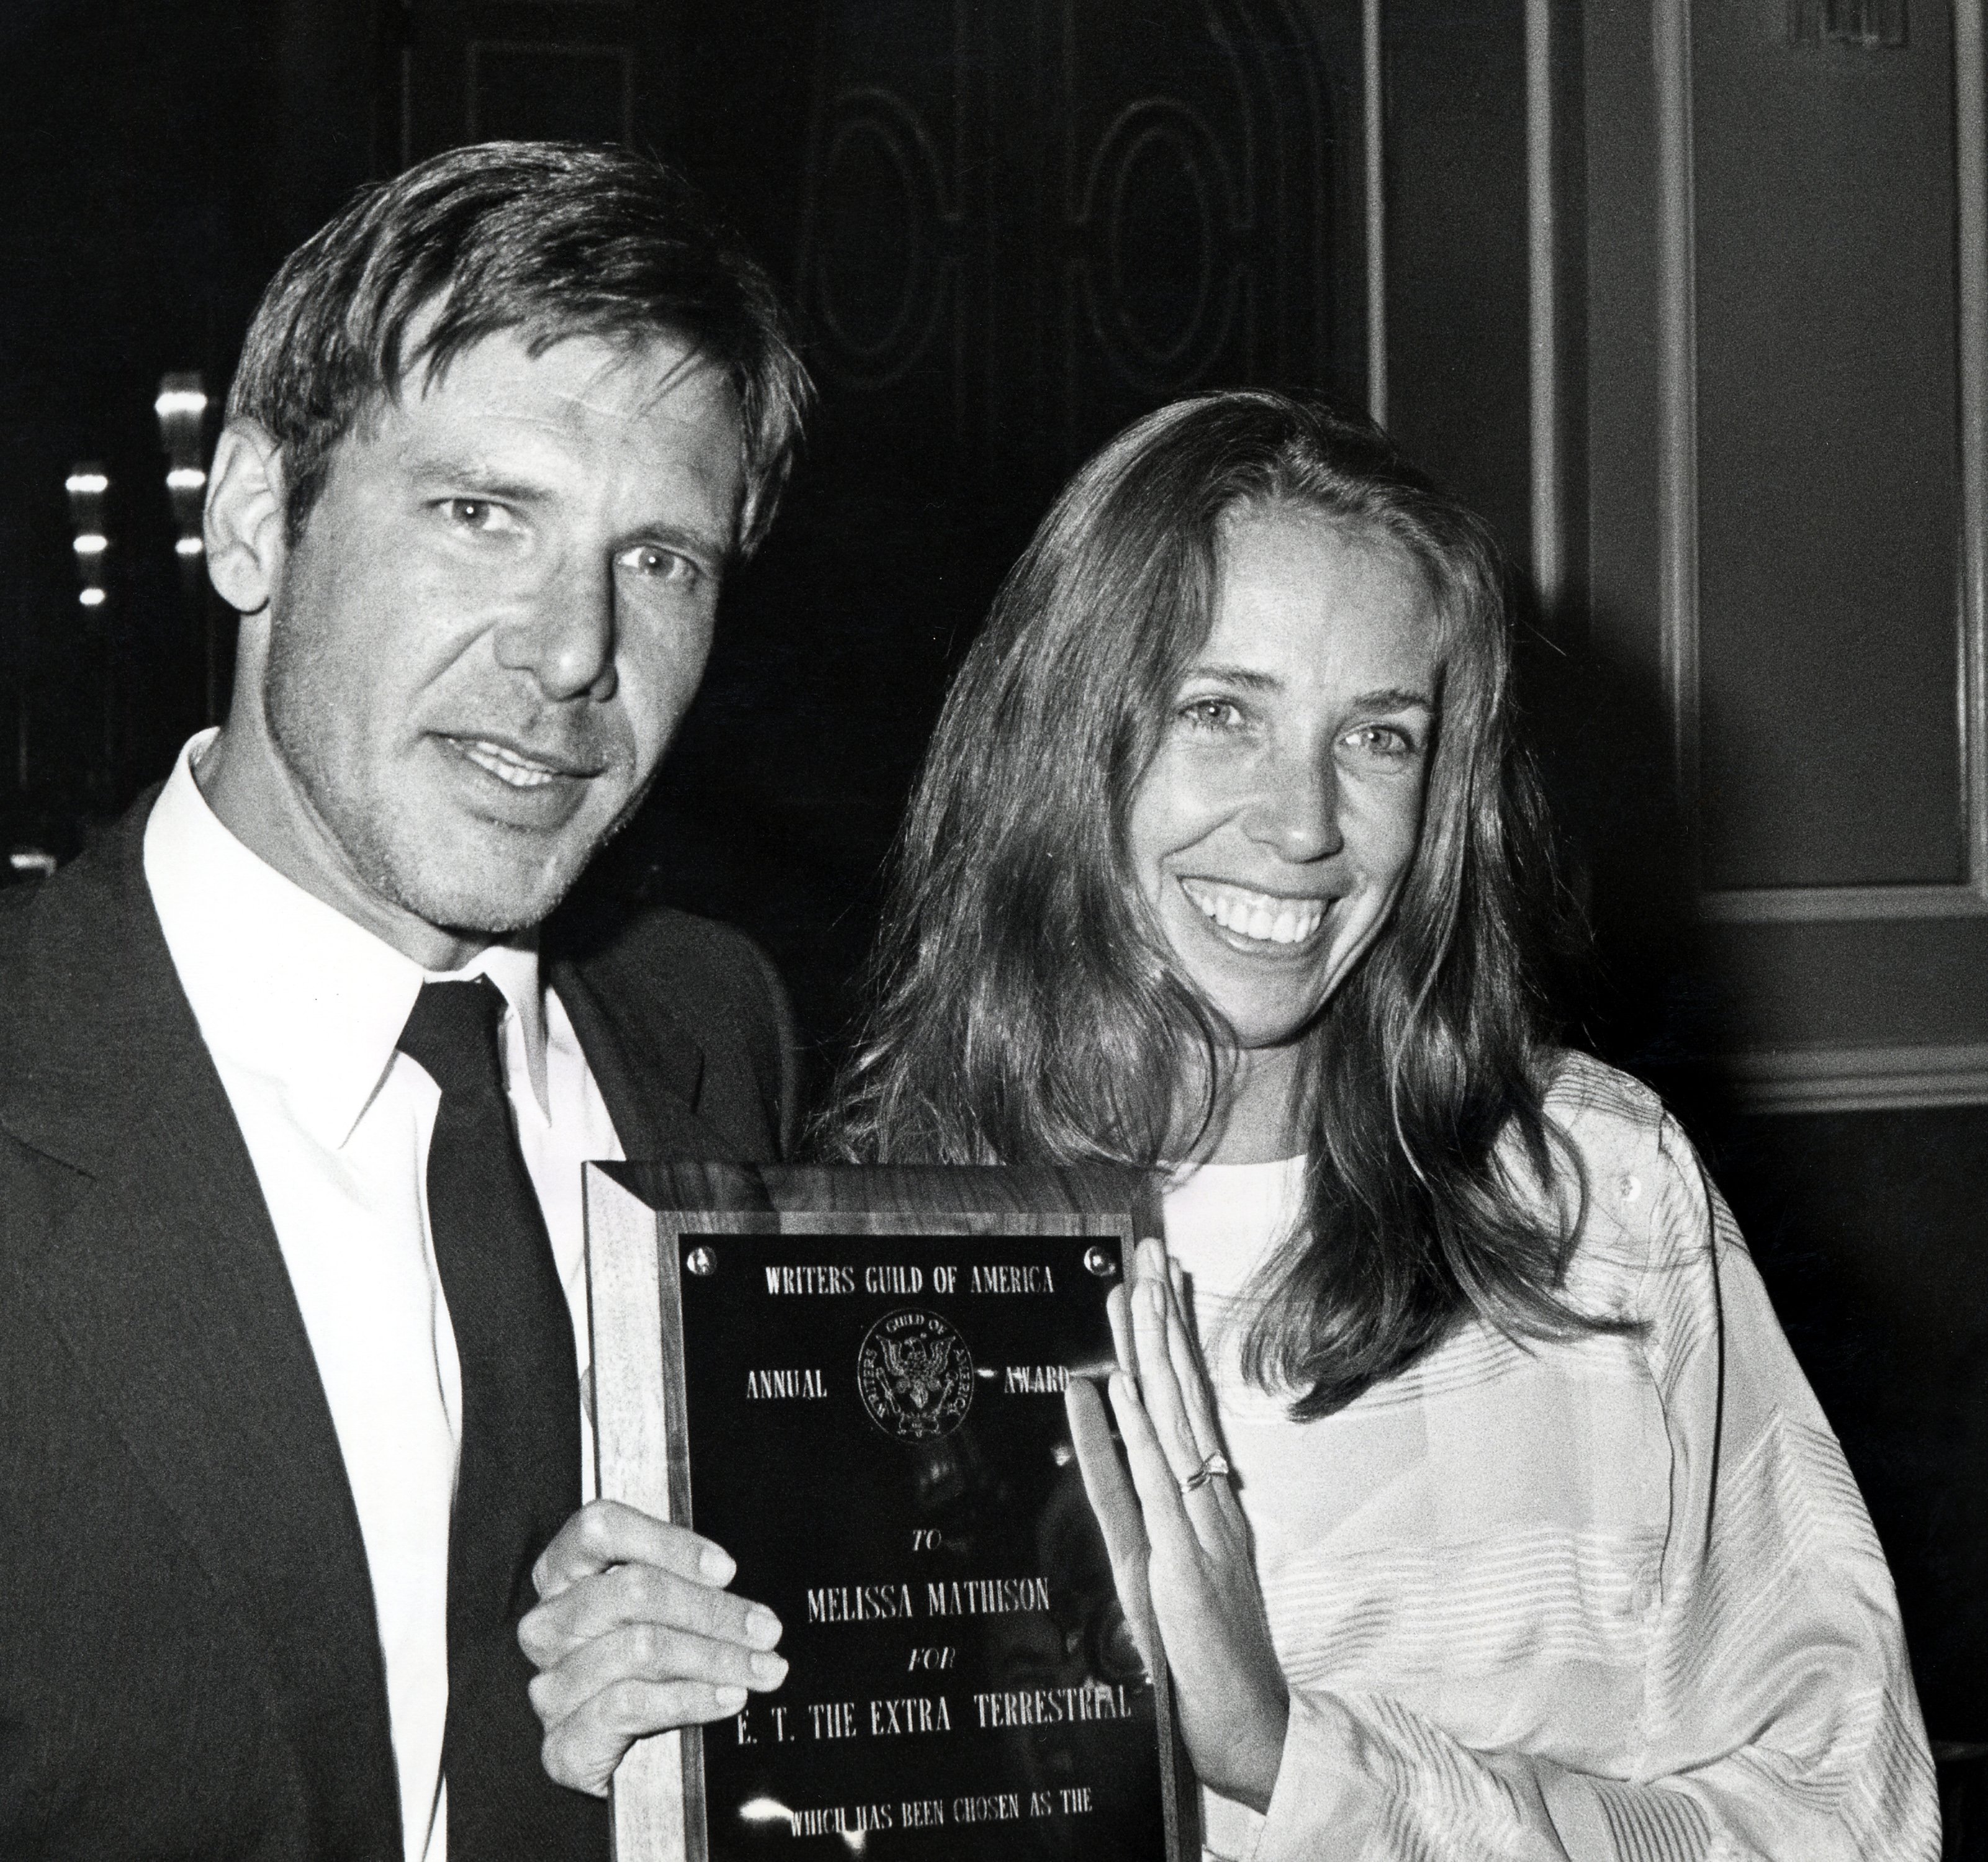 Harrison Ford and Melissa Mathison attend the Writers Guild Awards at the Beverly Hilton Hotel on April 7, 1983, in Beverly Hills, California. | Source: Getty Images